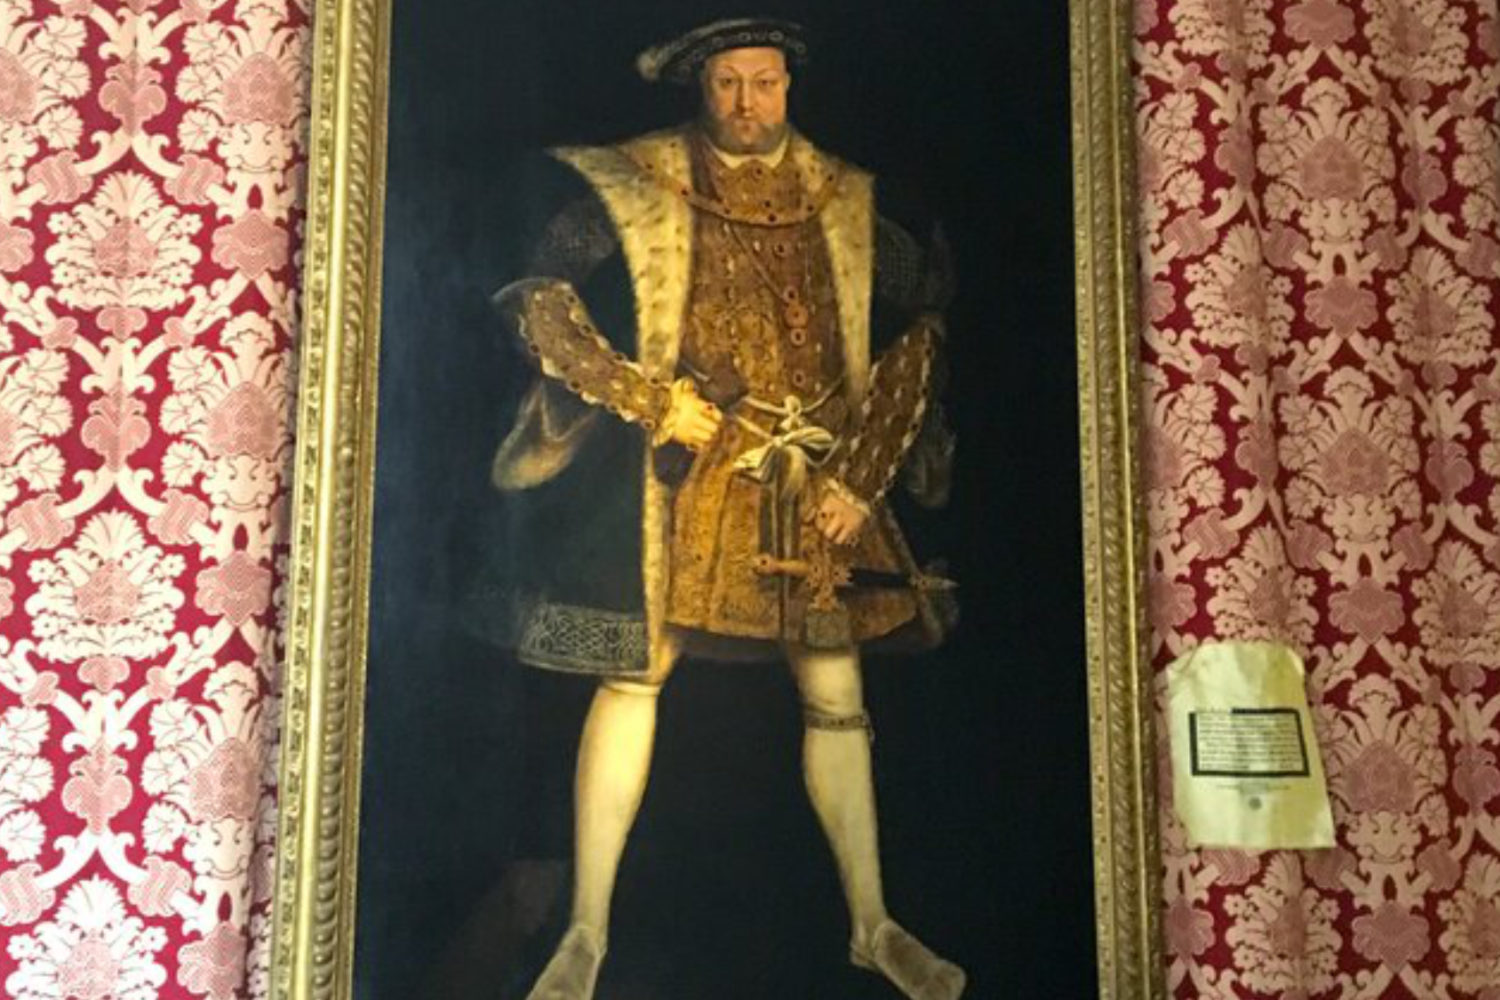 hampton court palace henry viii painting private tour guide